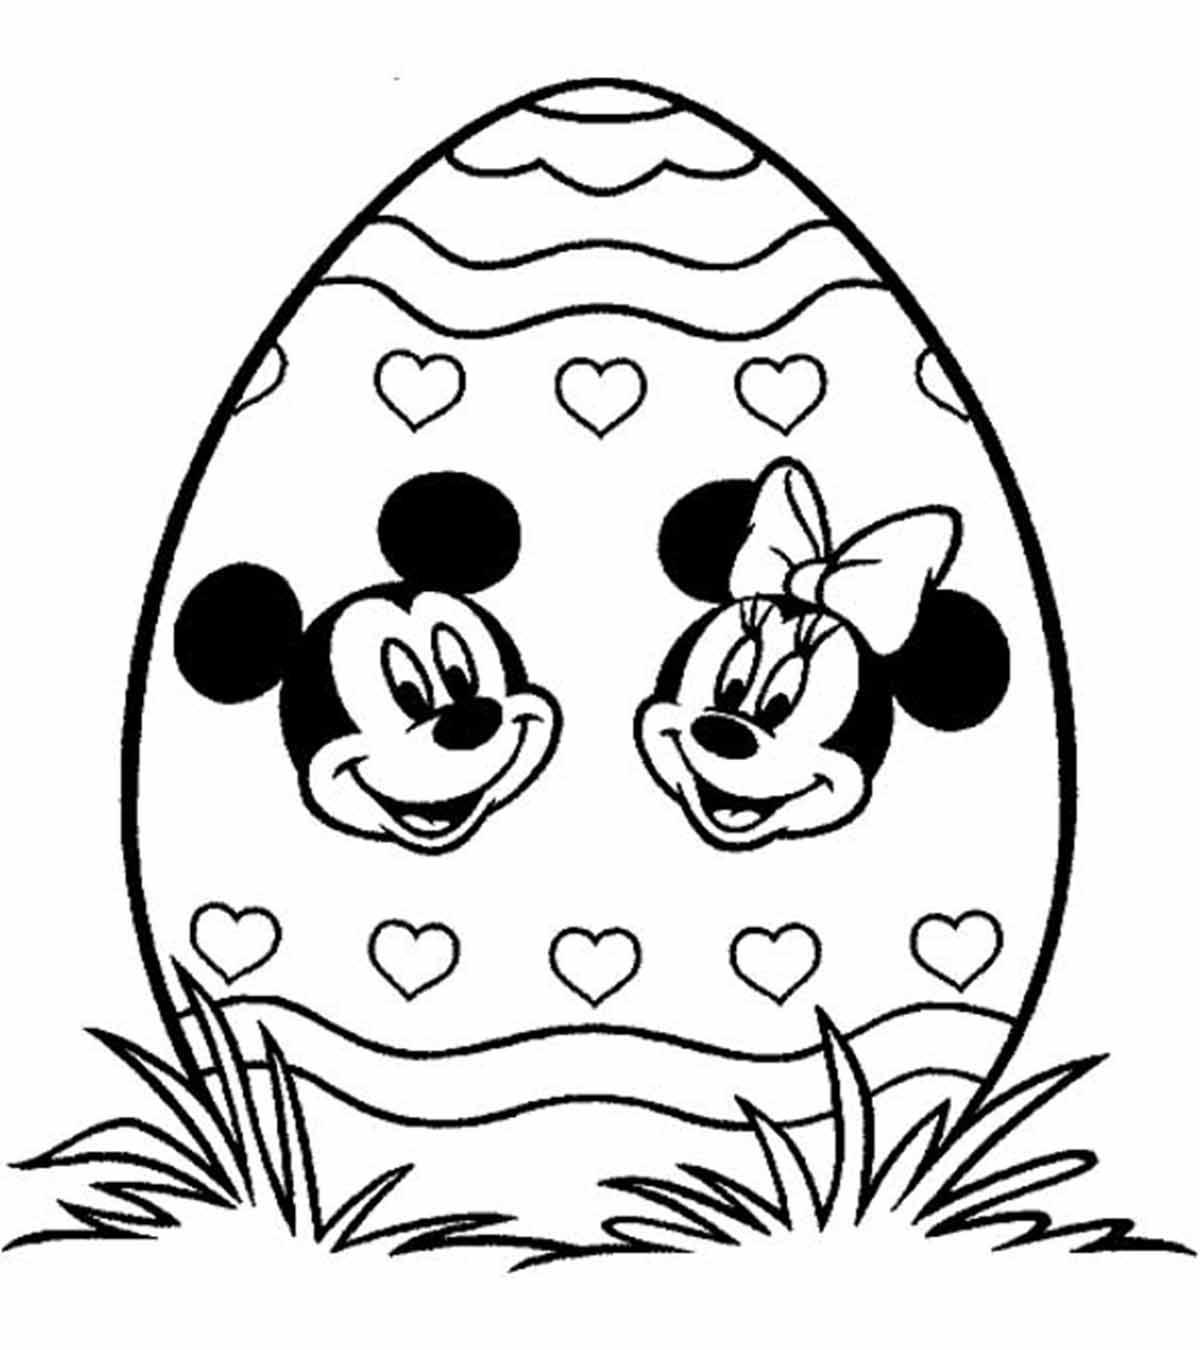 coloring pages for adults easter